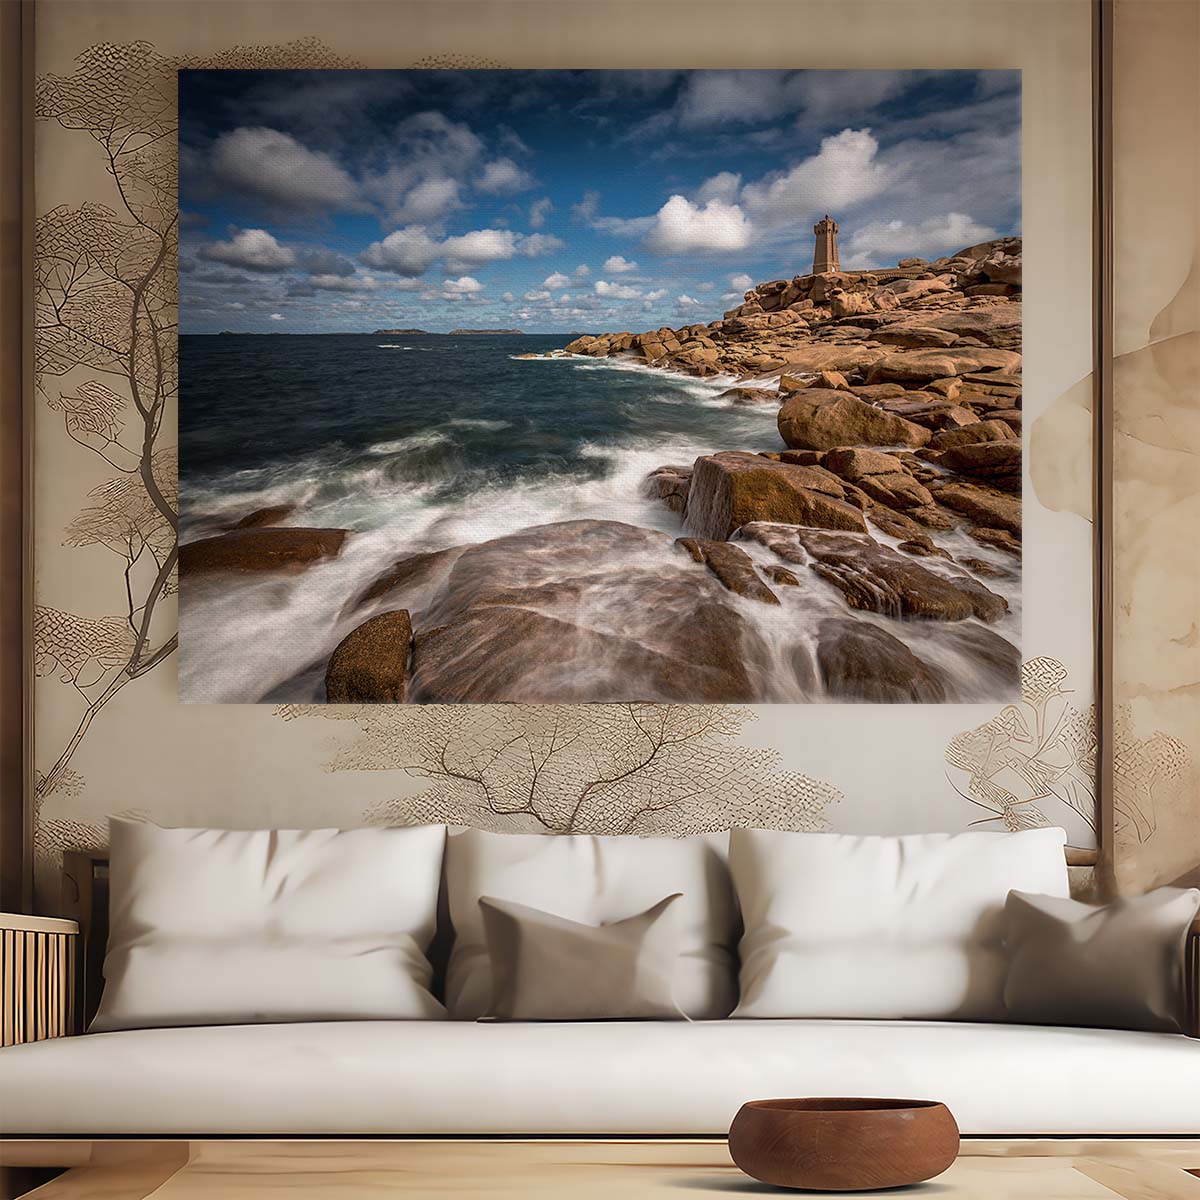 Brittany Lighthouse & Cliffs Seascape Wall Art by Luxuriance Designs. Made in USA.